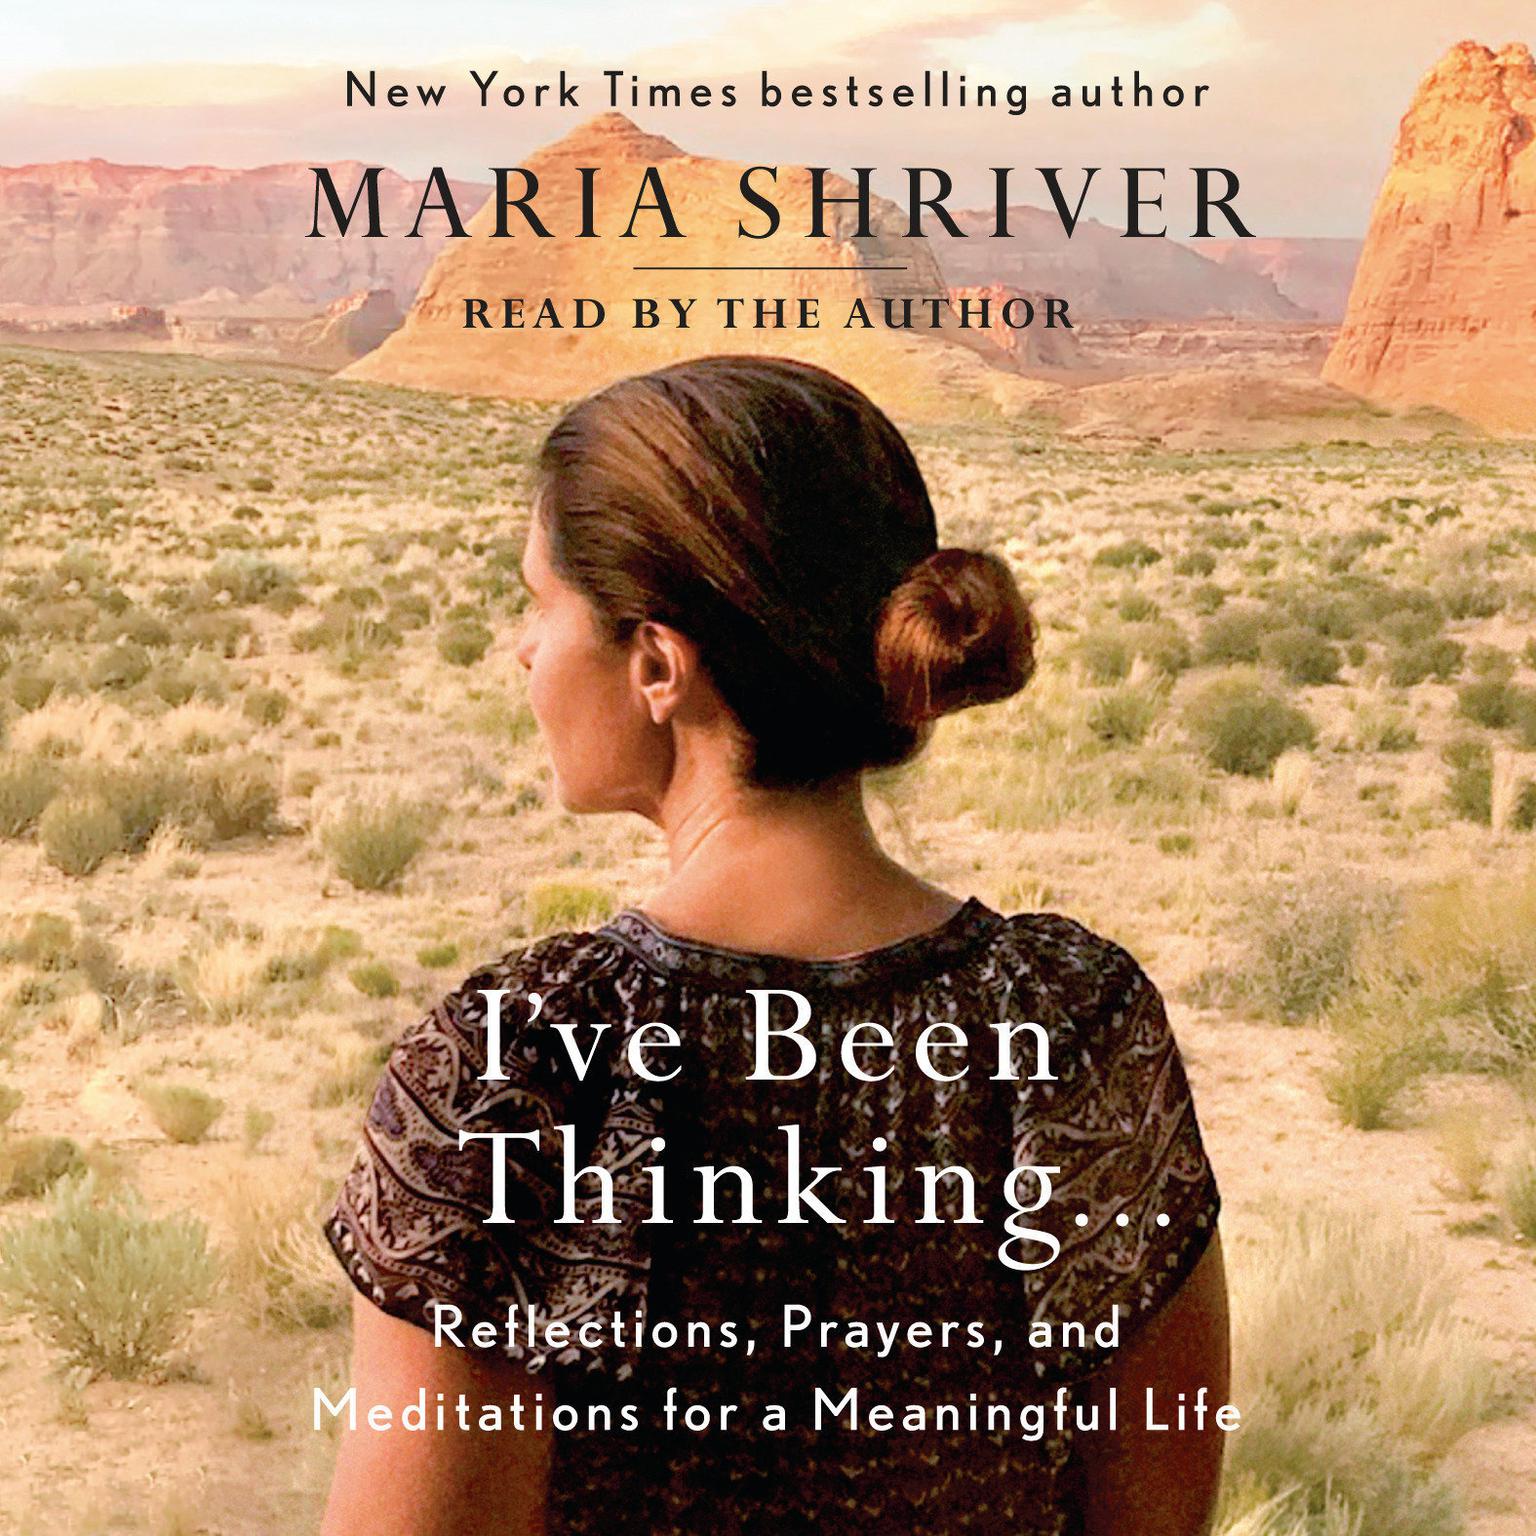 Ive Been Thinking . . .: Reflections, Prayers, and Meditations for a Meaningful Life Audiobook, by Maria Shriver